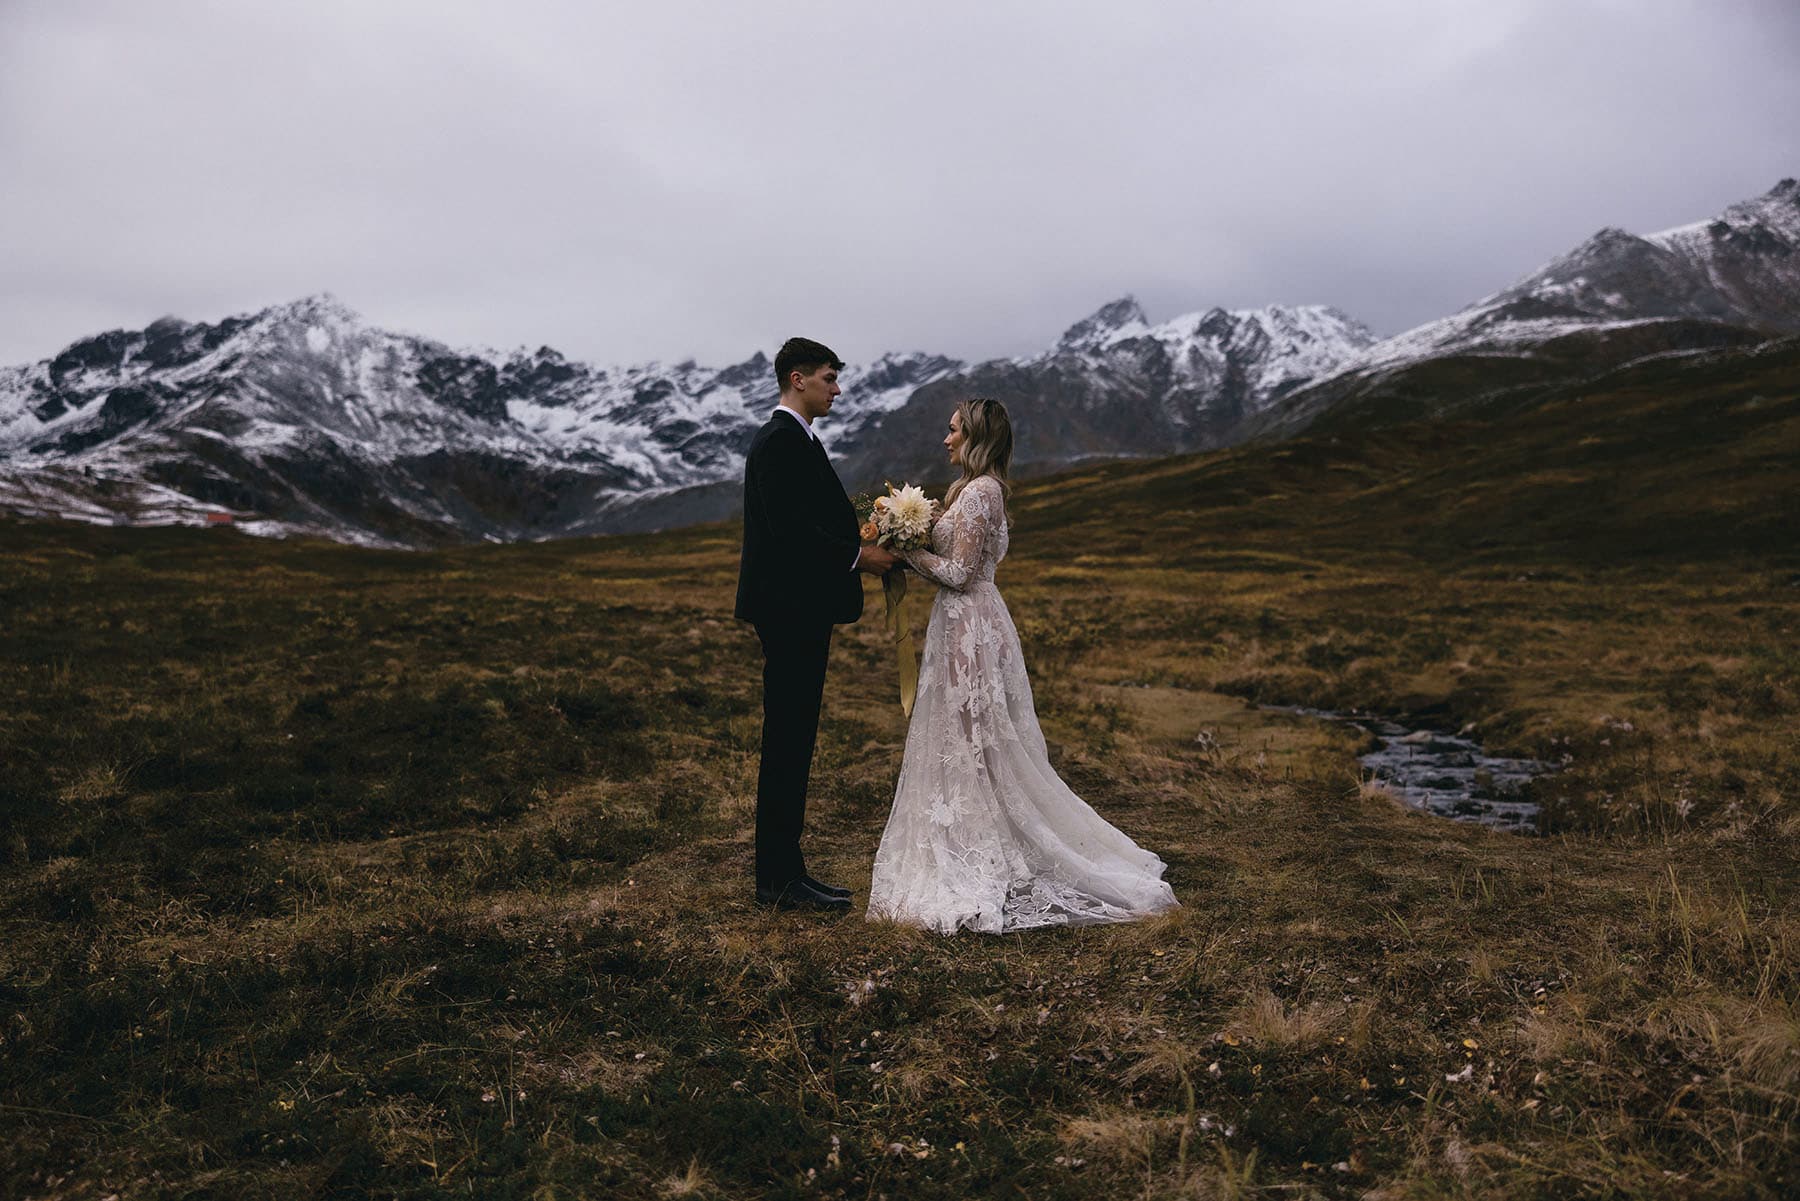 There are plentty of ways to have a wedding but I will show you how to elope in Alaska.